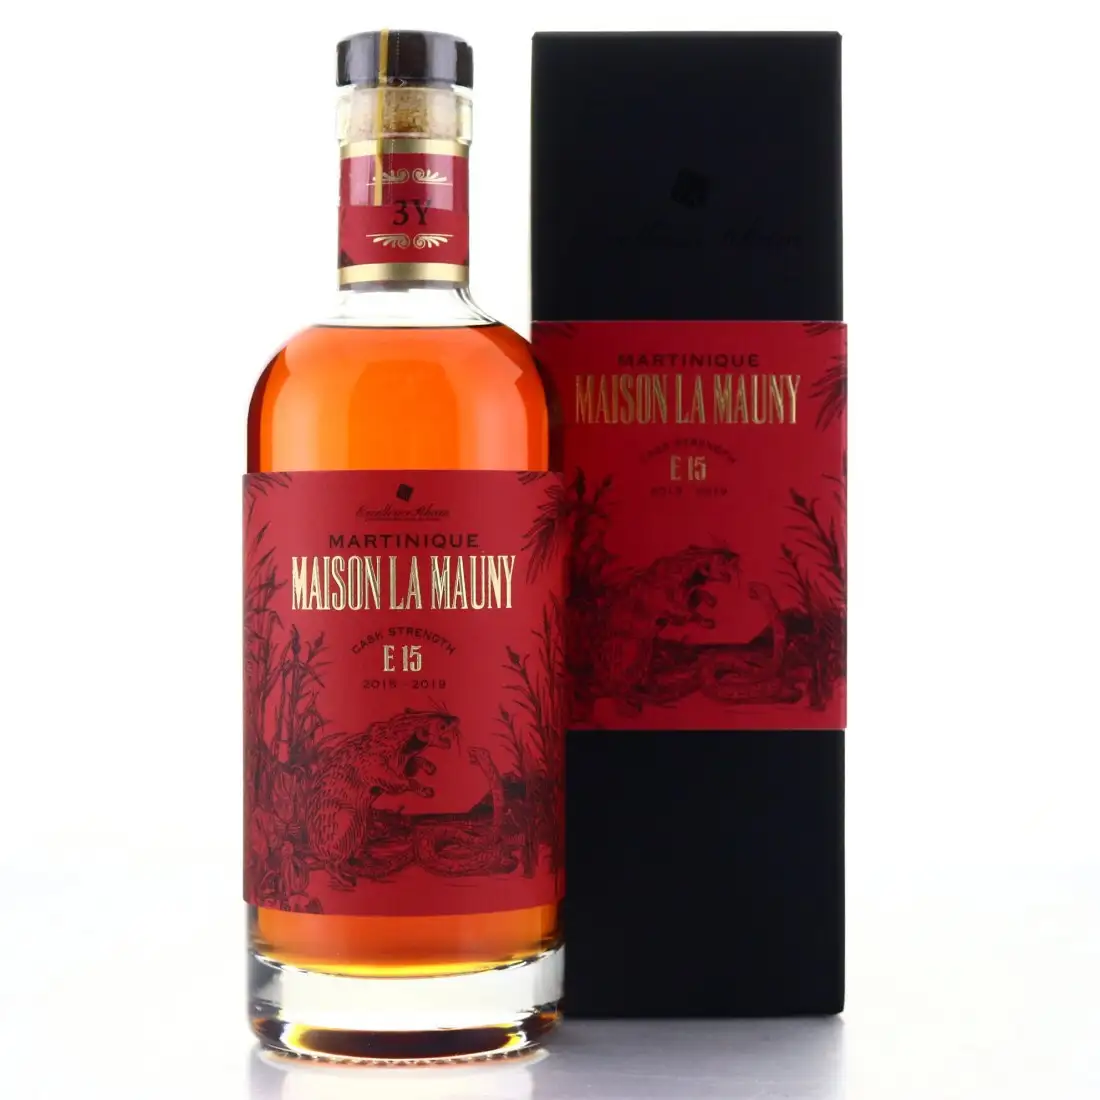 Image of the front of the bottle of the rum 2015